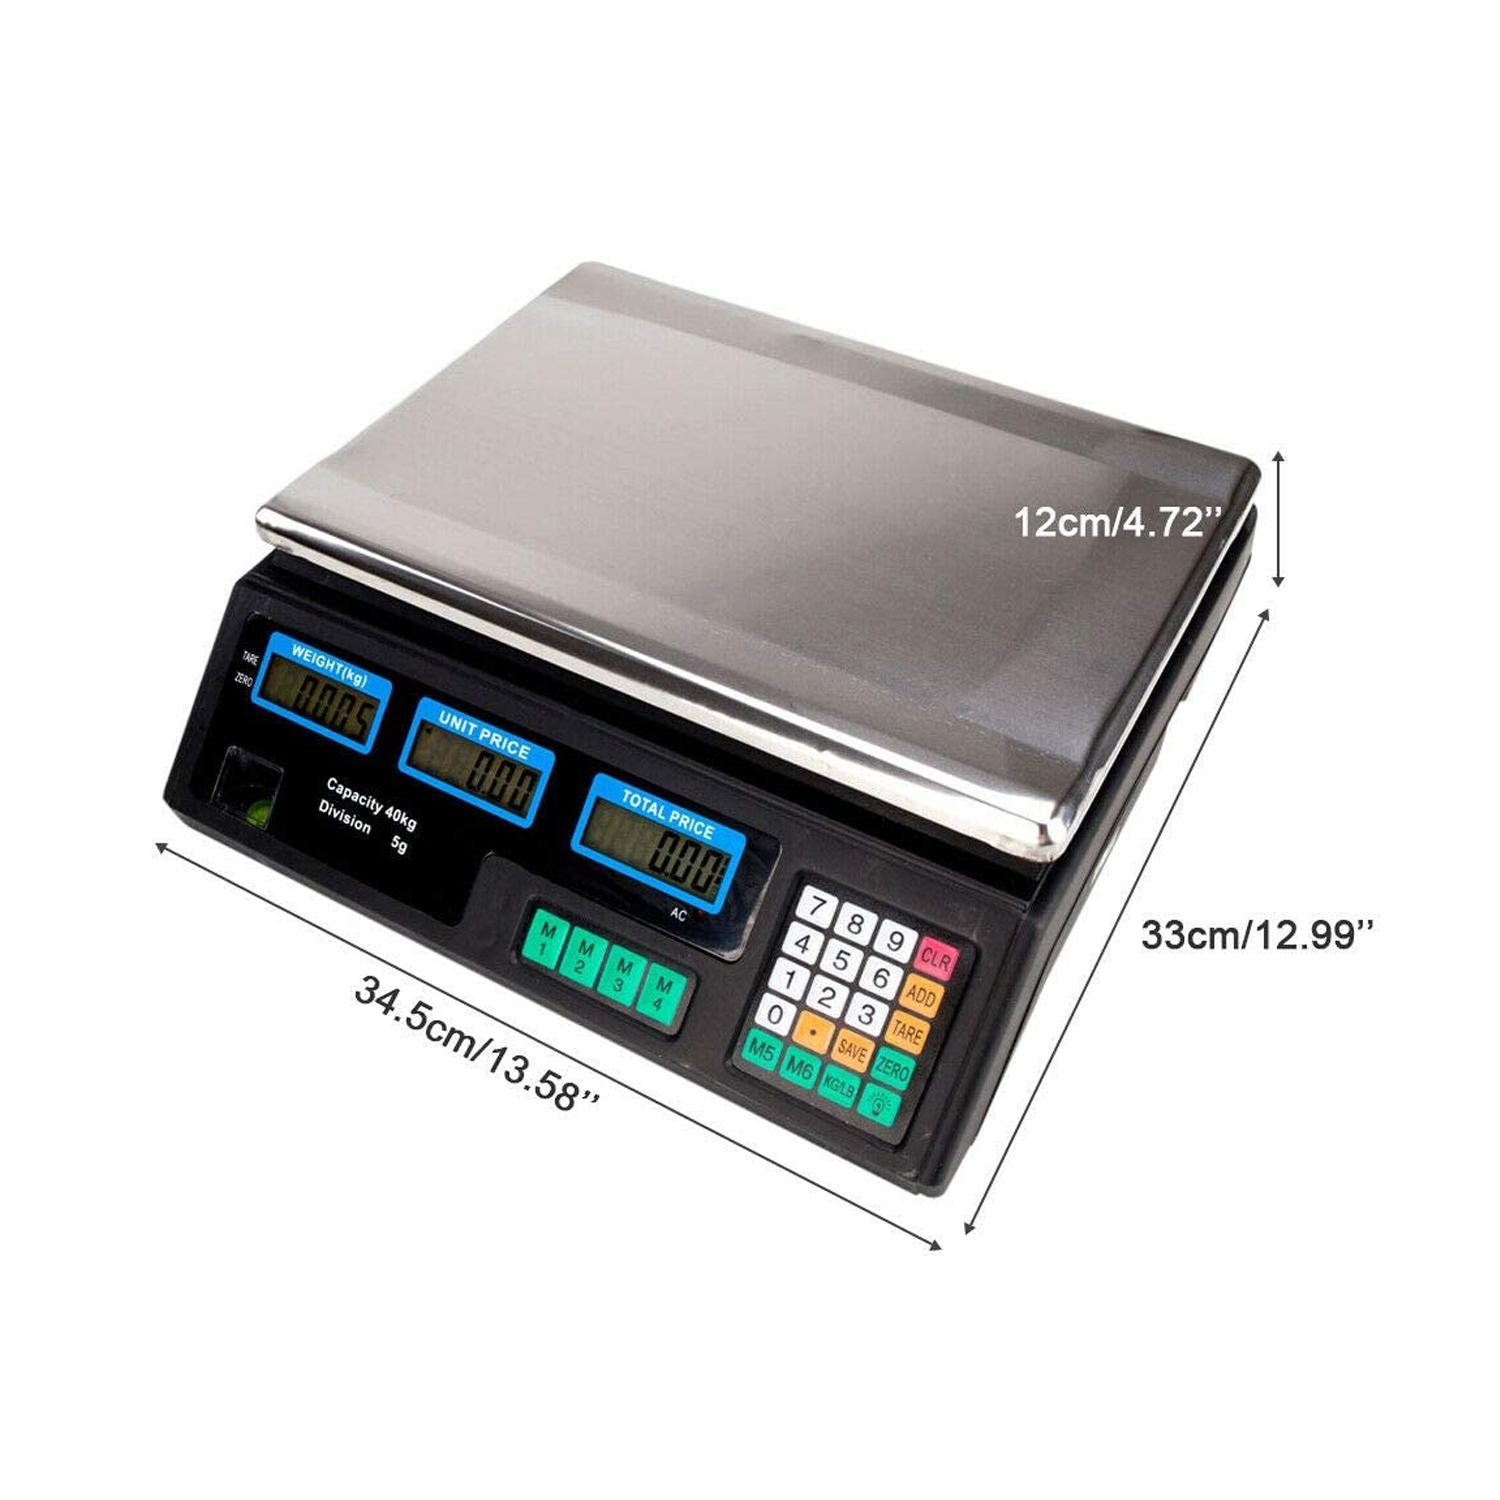 XPART 40KG WEIGHING SCALE